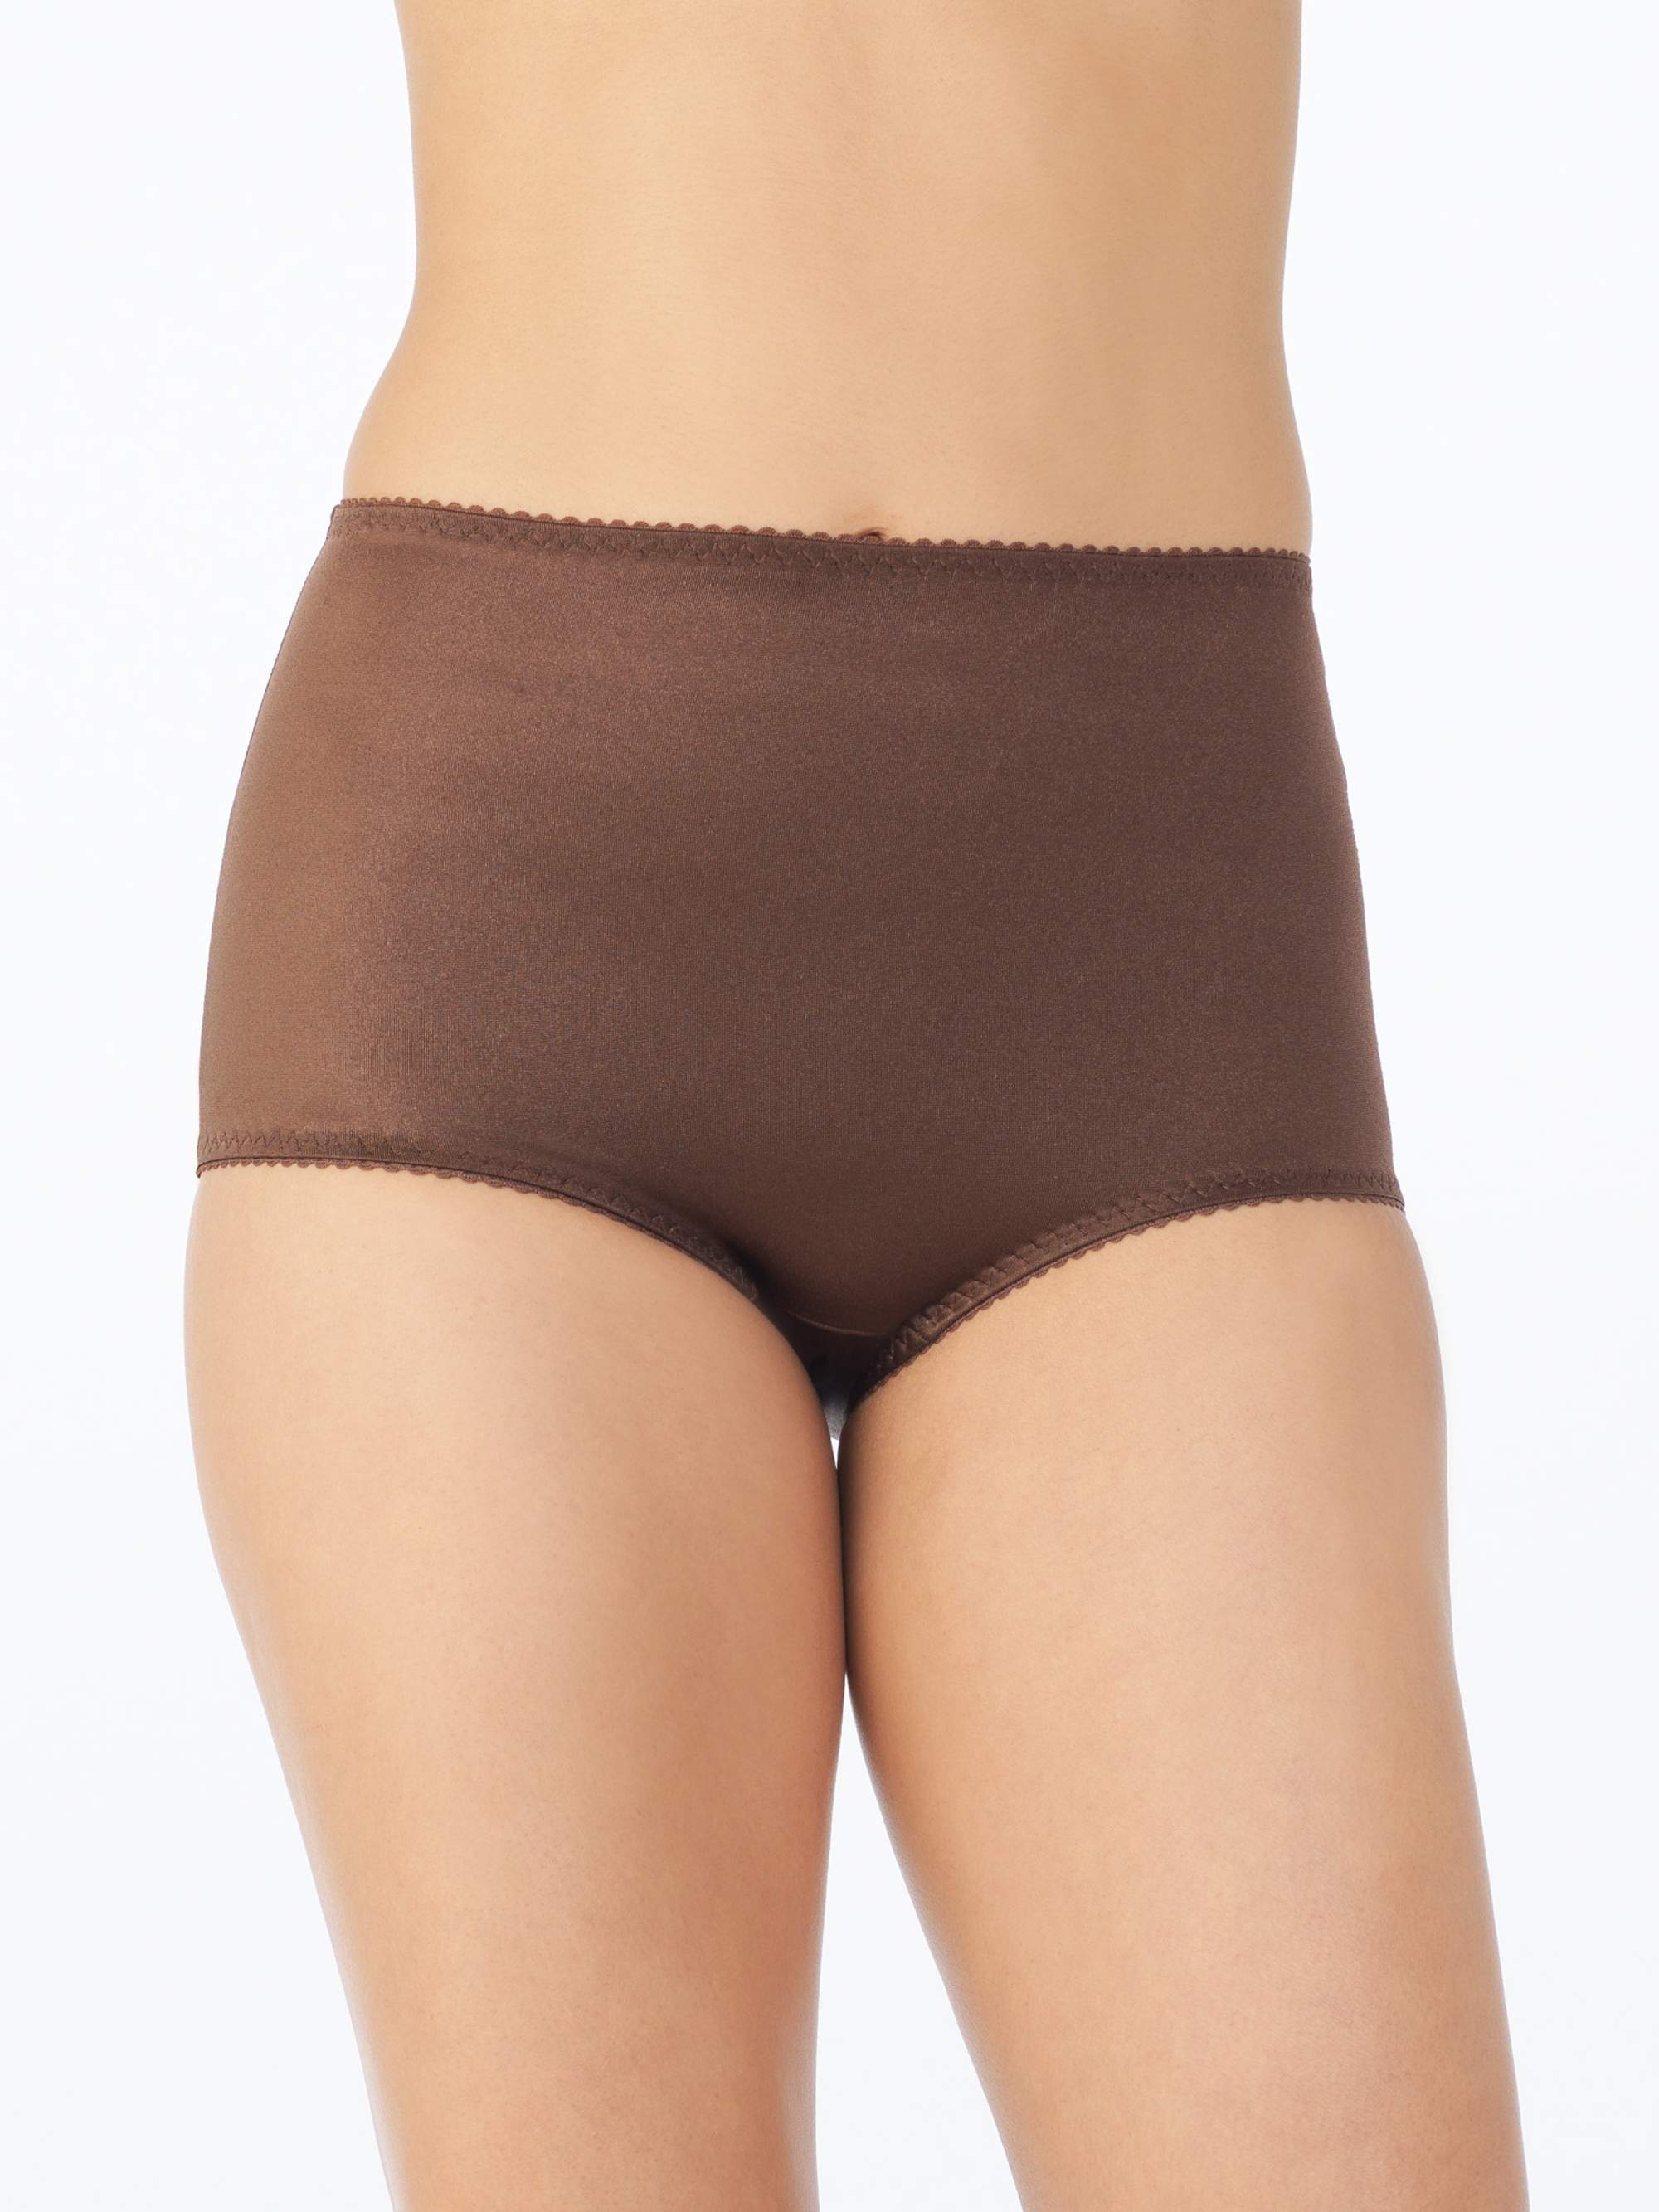 Women's Vassarette 40001 Undershapers Smoothing & Shaping Brief Panty (Chocolate Kiss M) - image 1 of 4